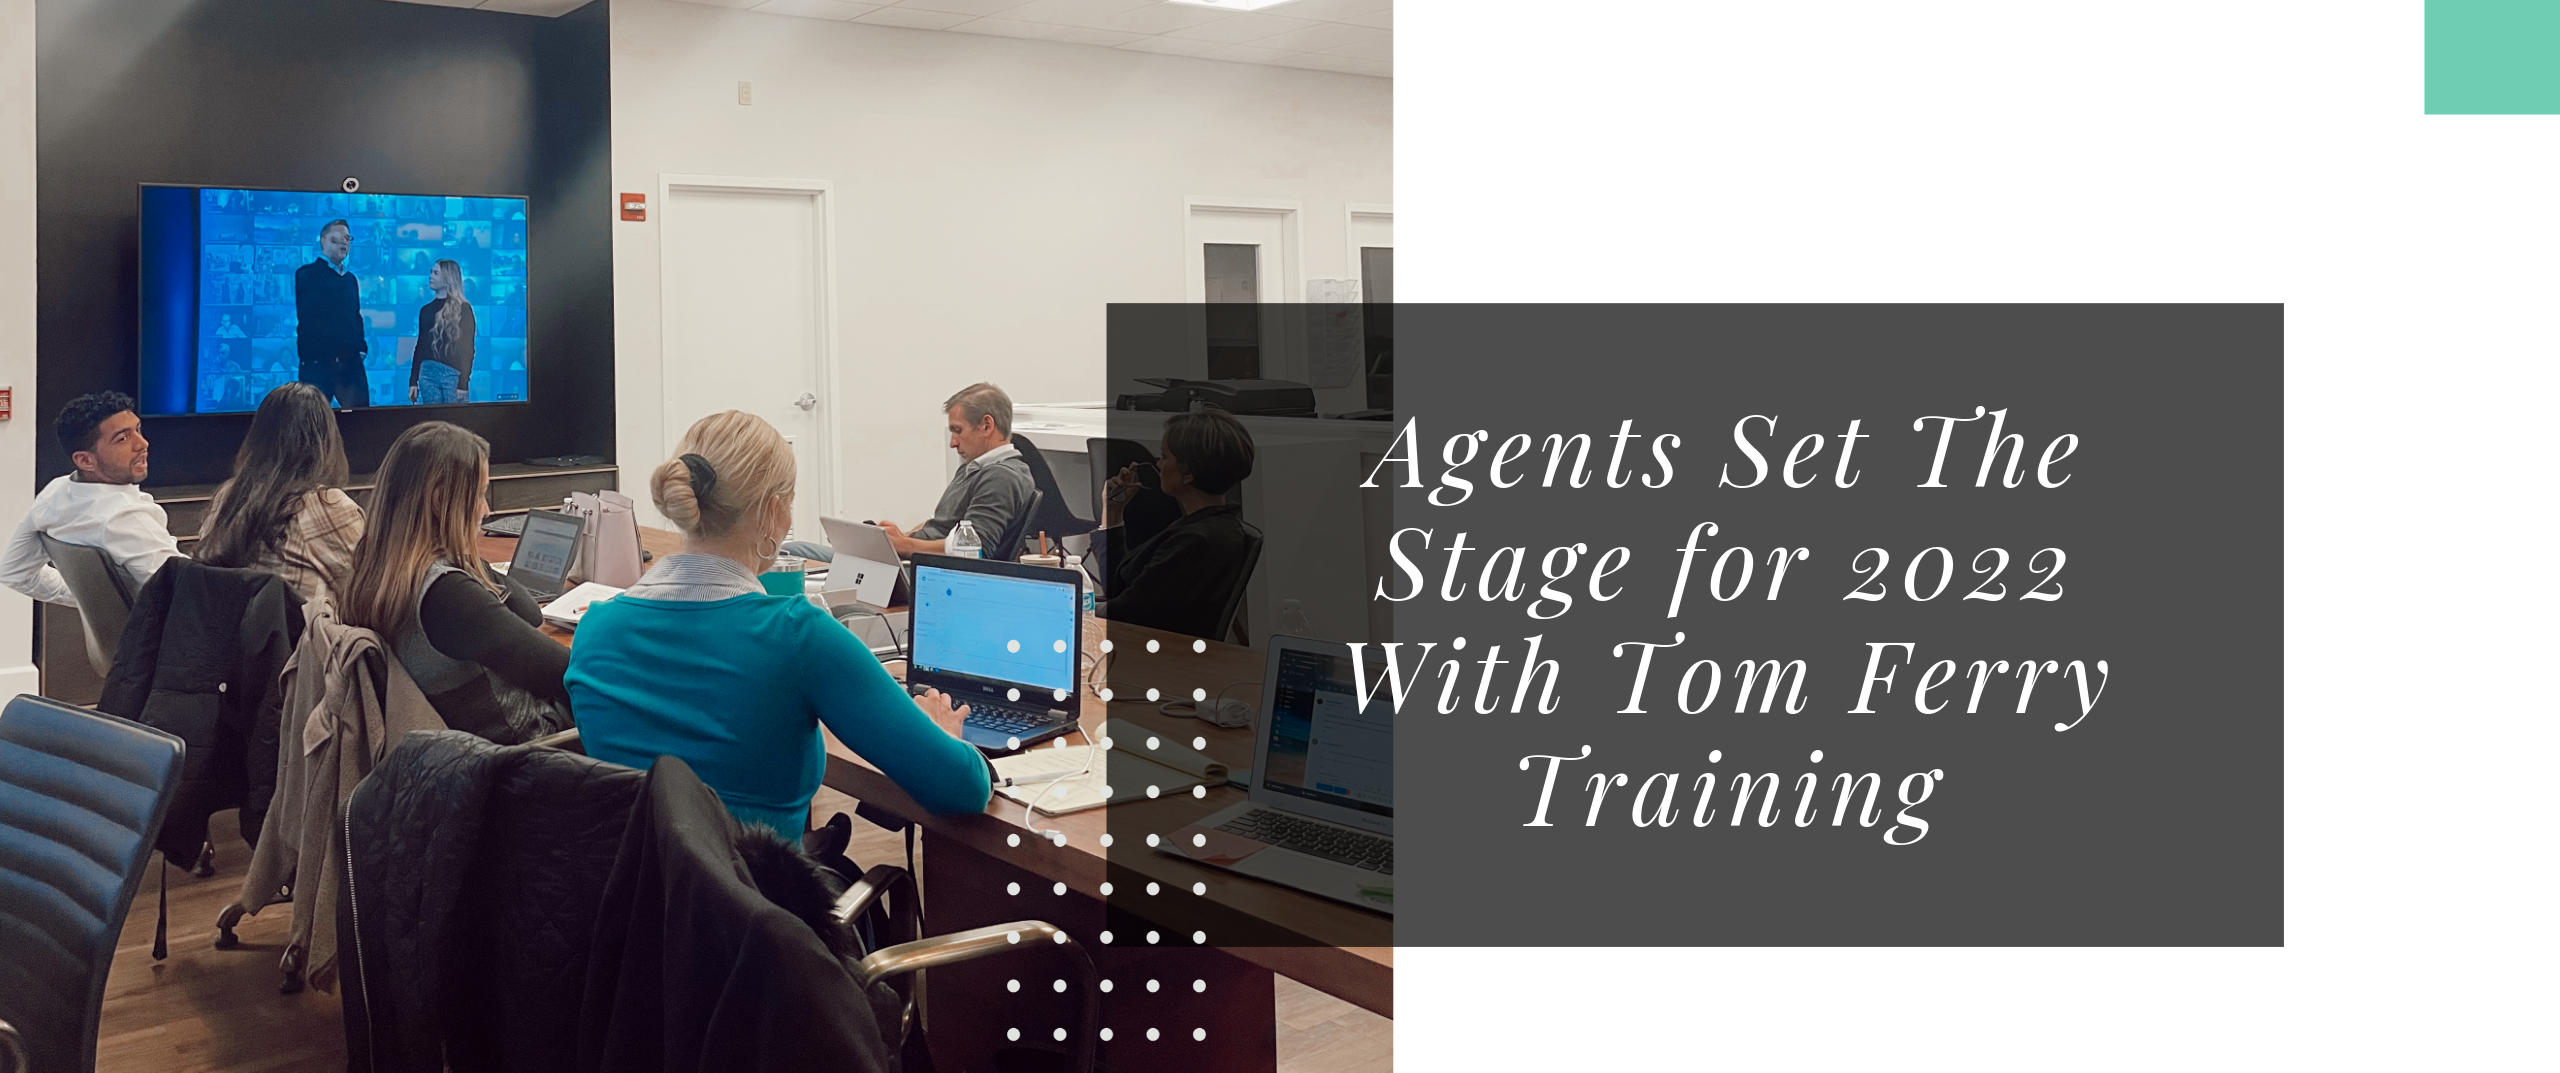 CHARLESGATE Agents Set The Stage for 2022 With Tom Ferry Training